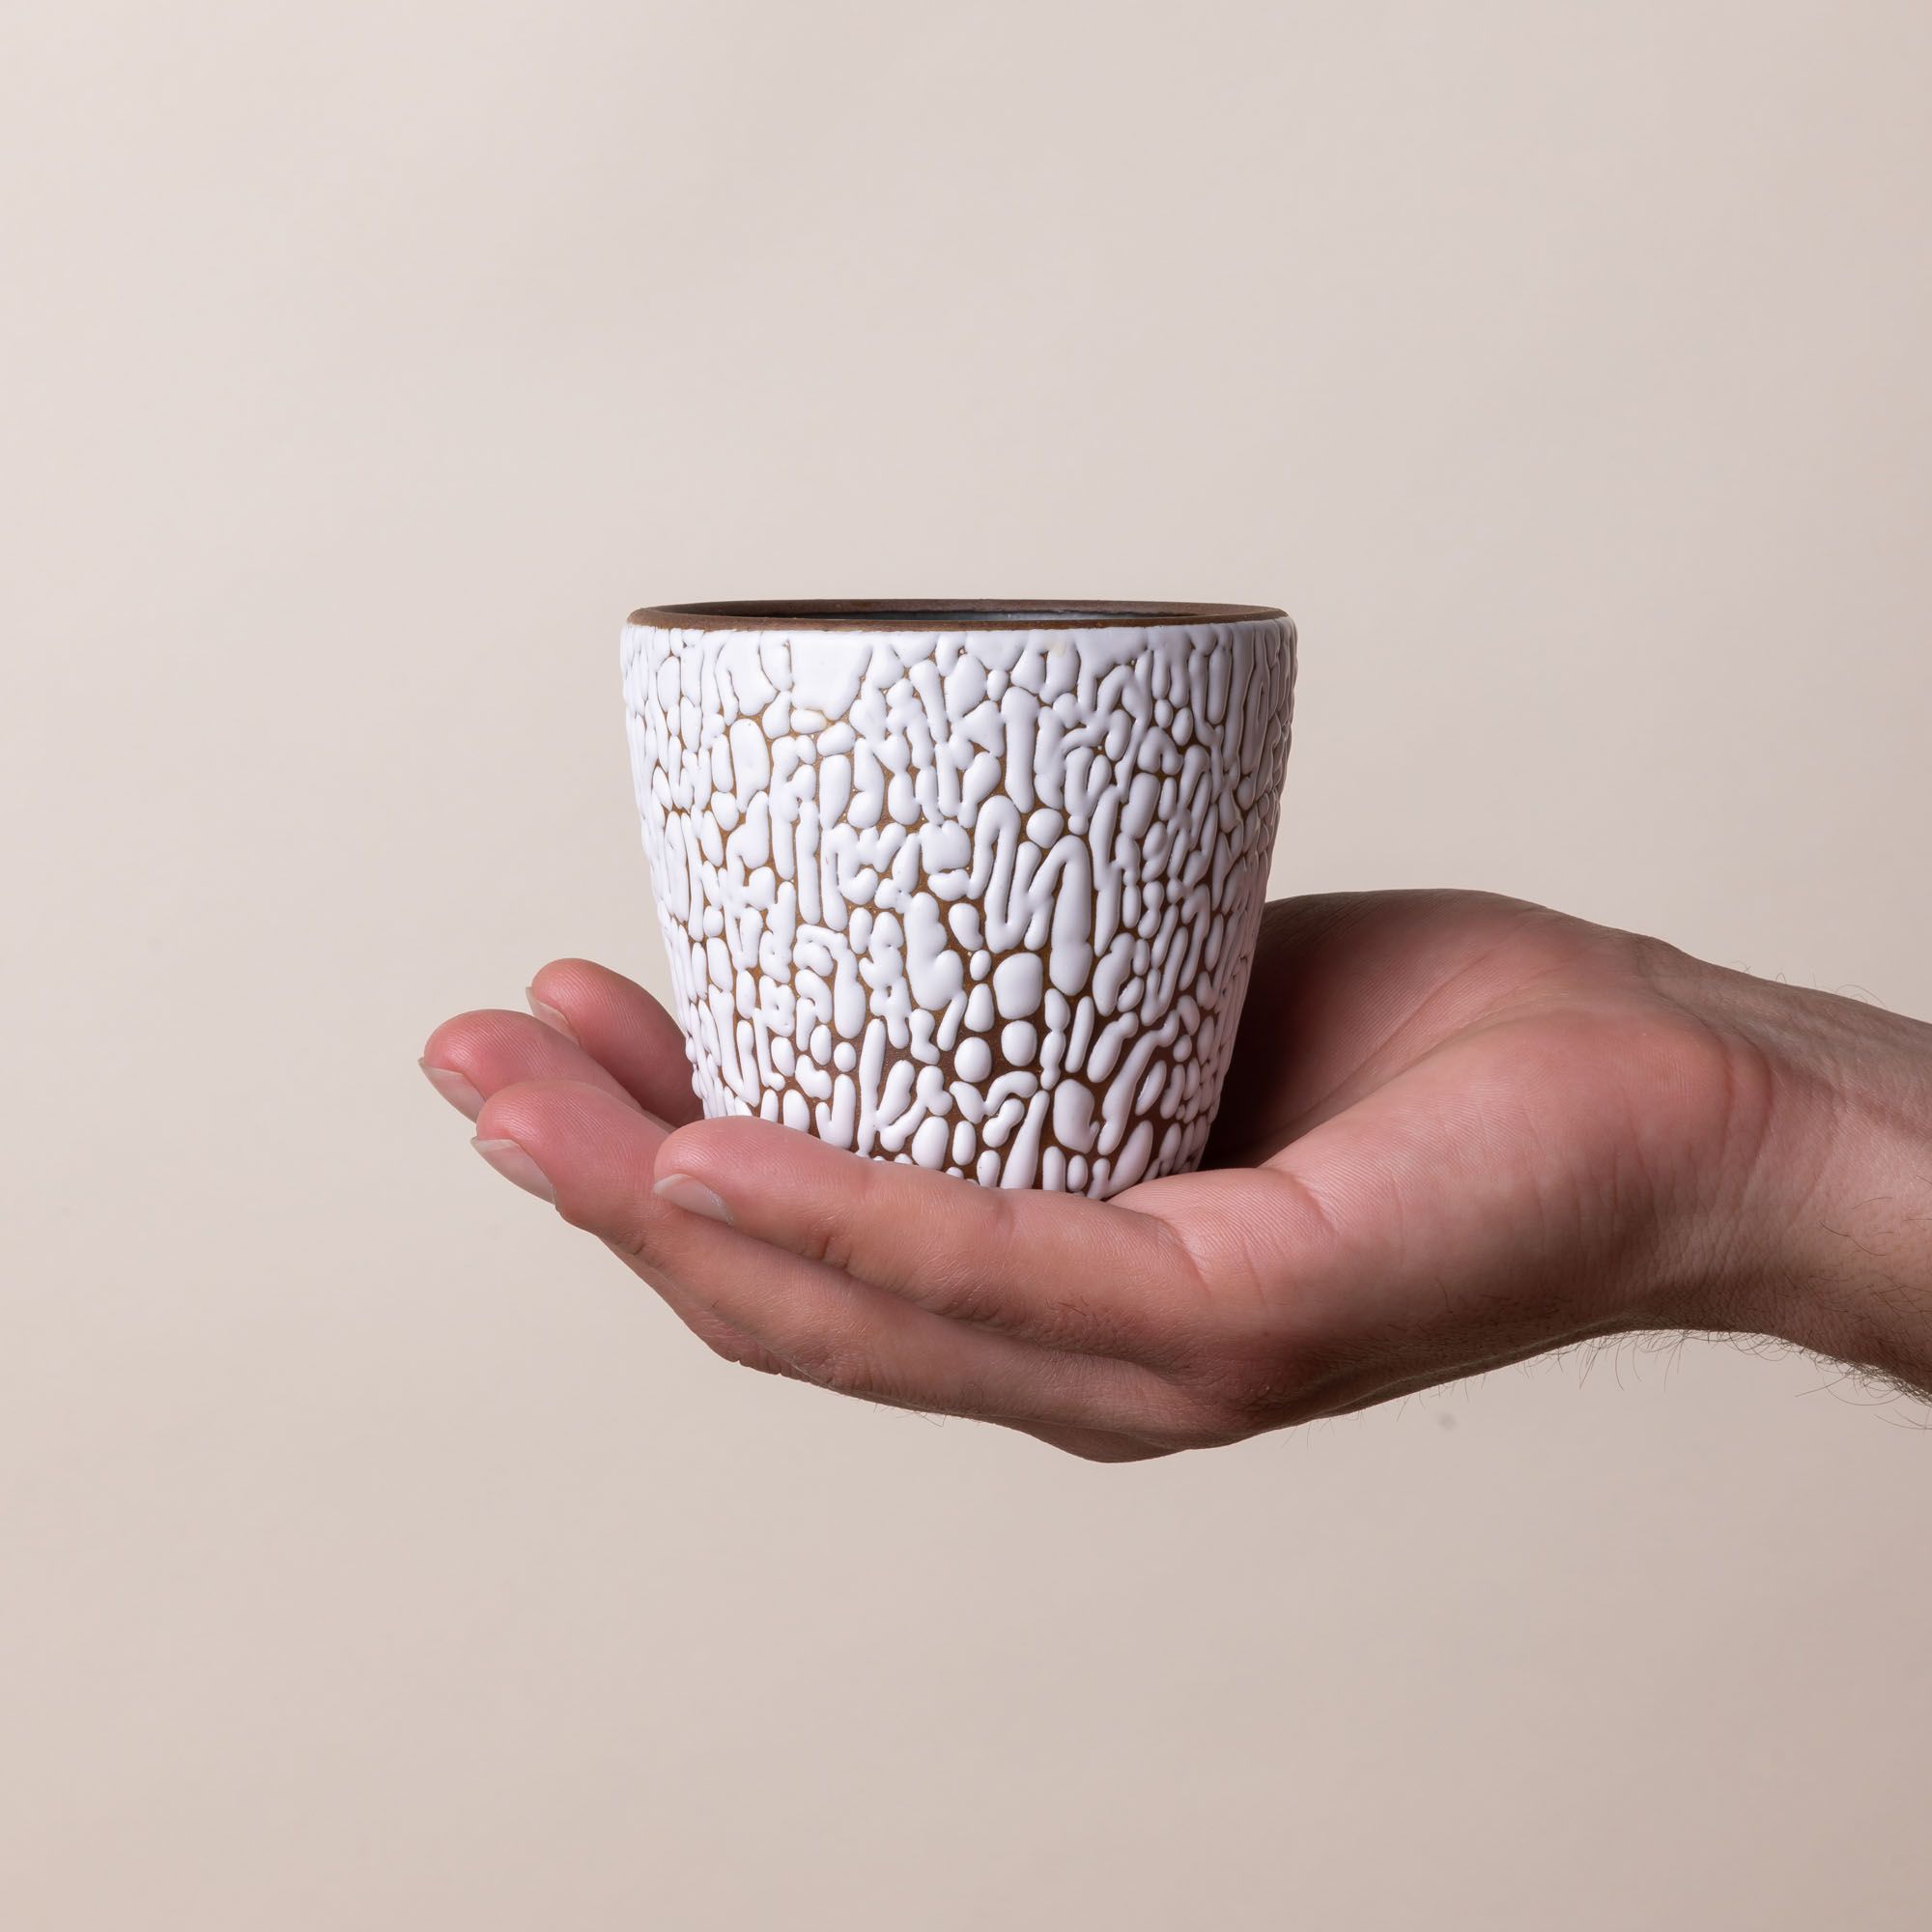 A hand holds a small ceramic cup with cracked texture and the interior being dark teal.